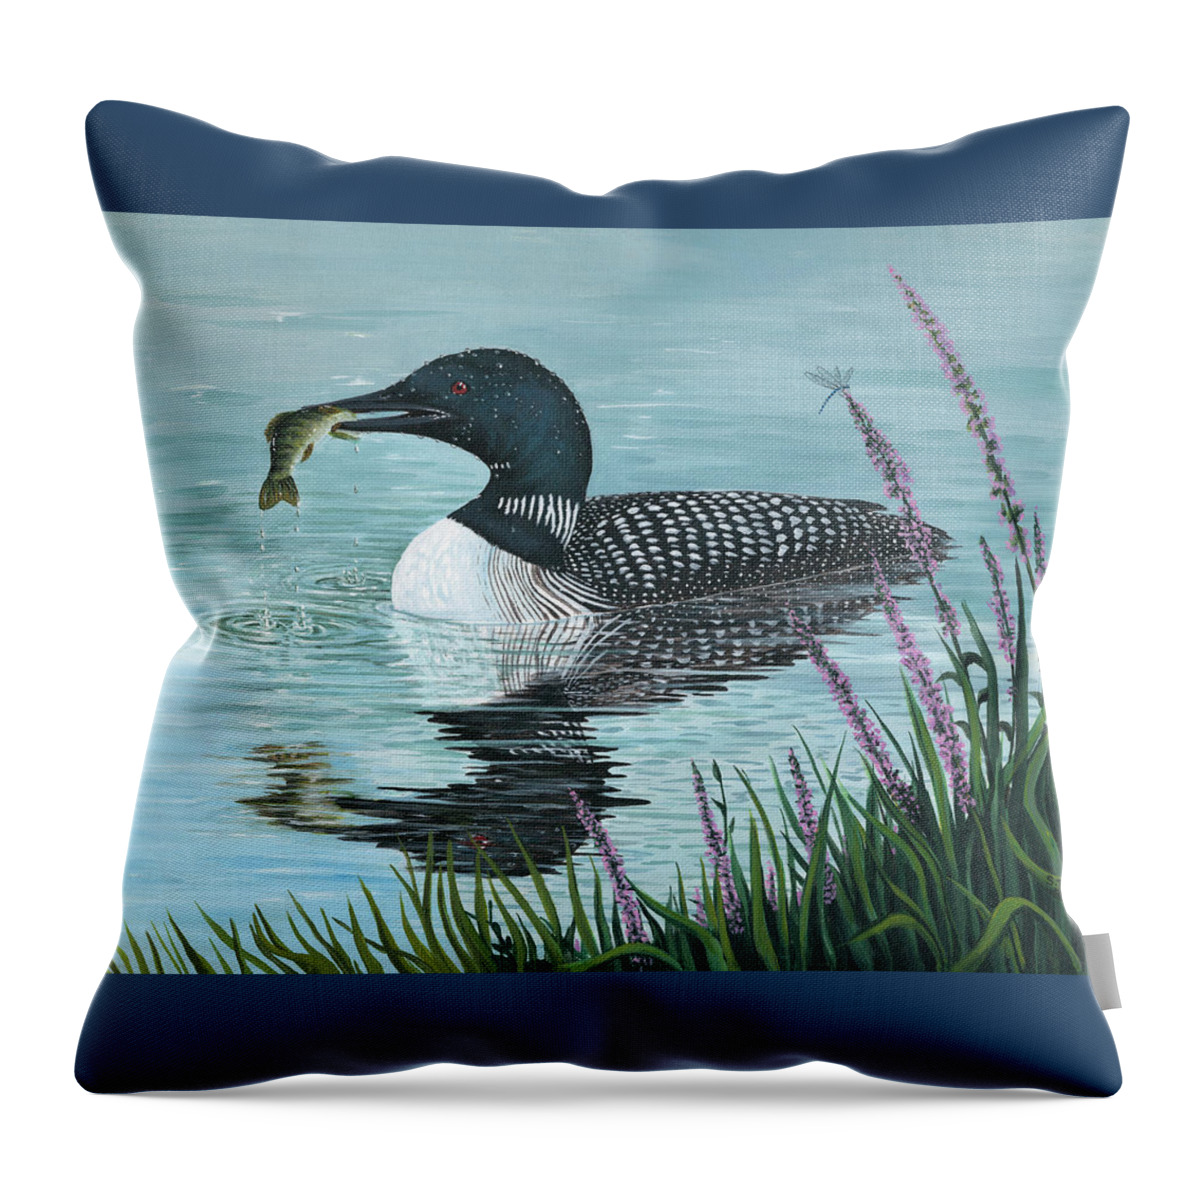 Bait Throw Pillow featuring the painting The Catch by Sheri Jo Posselt